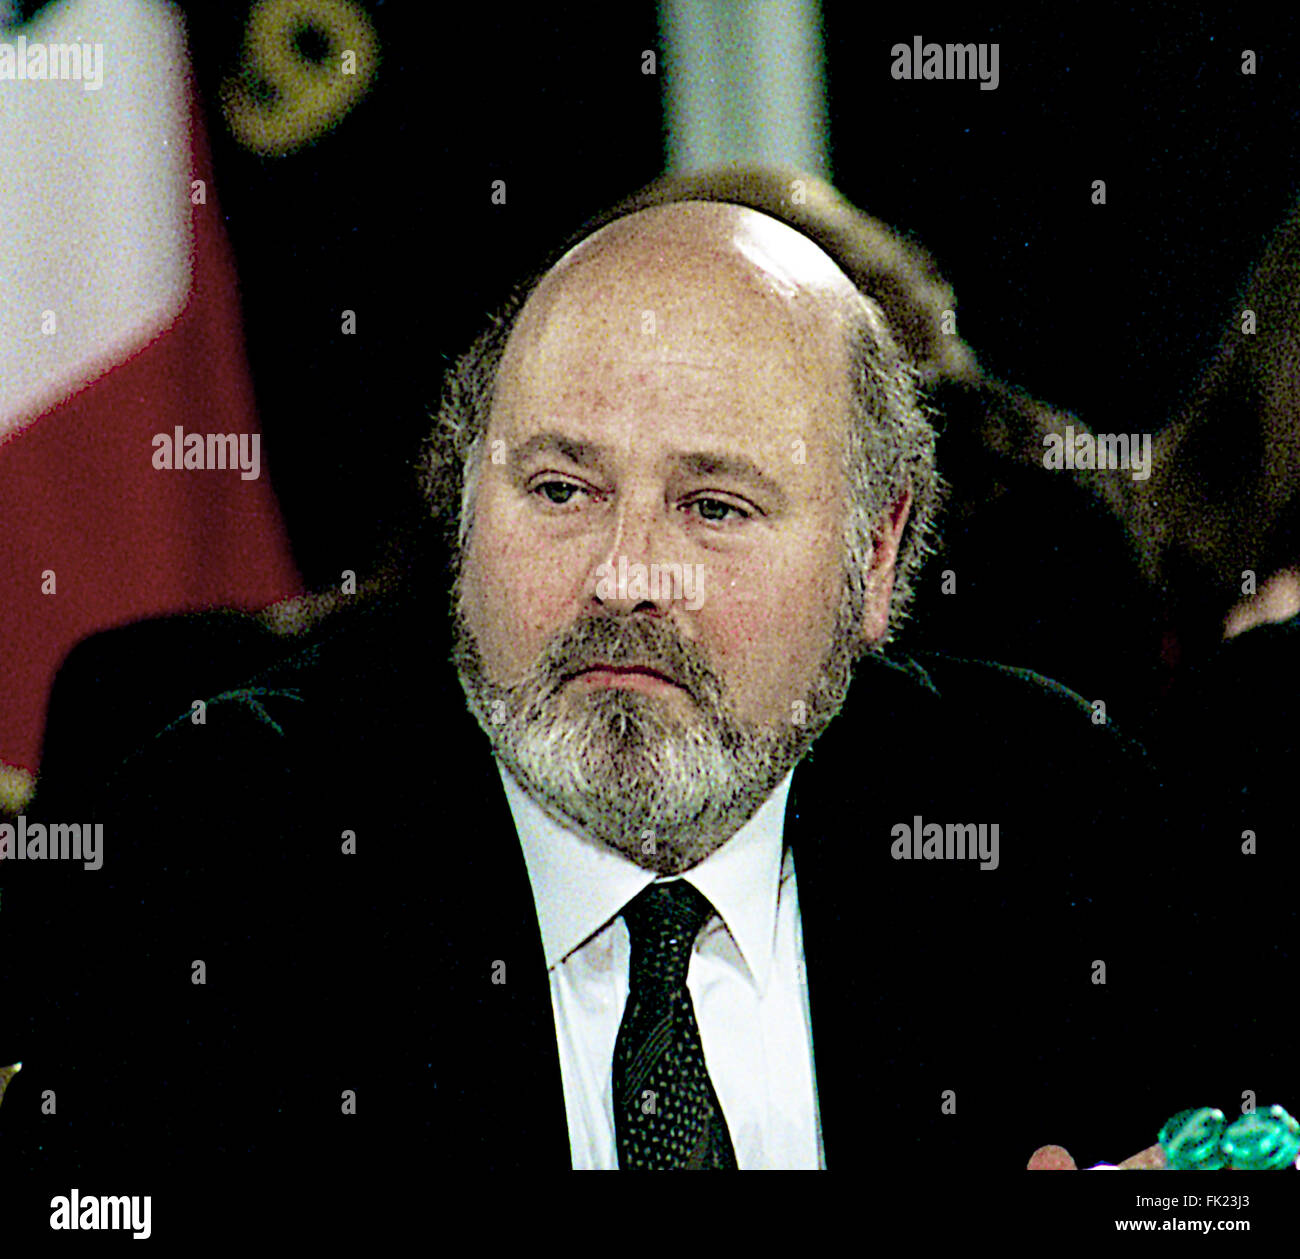 Washington, DC., USA, 4th February, 1977 Actor Rob Reiner addresses the National Governors Meeting  Credit: Mark Reinstein Stock Photo